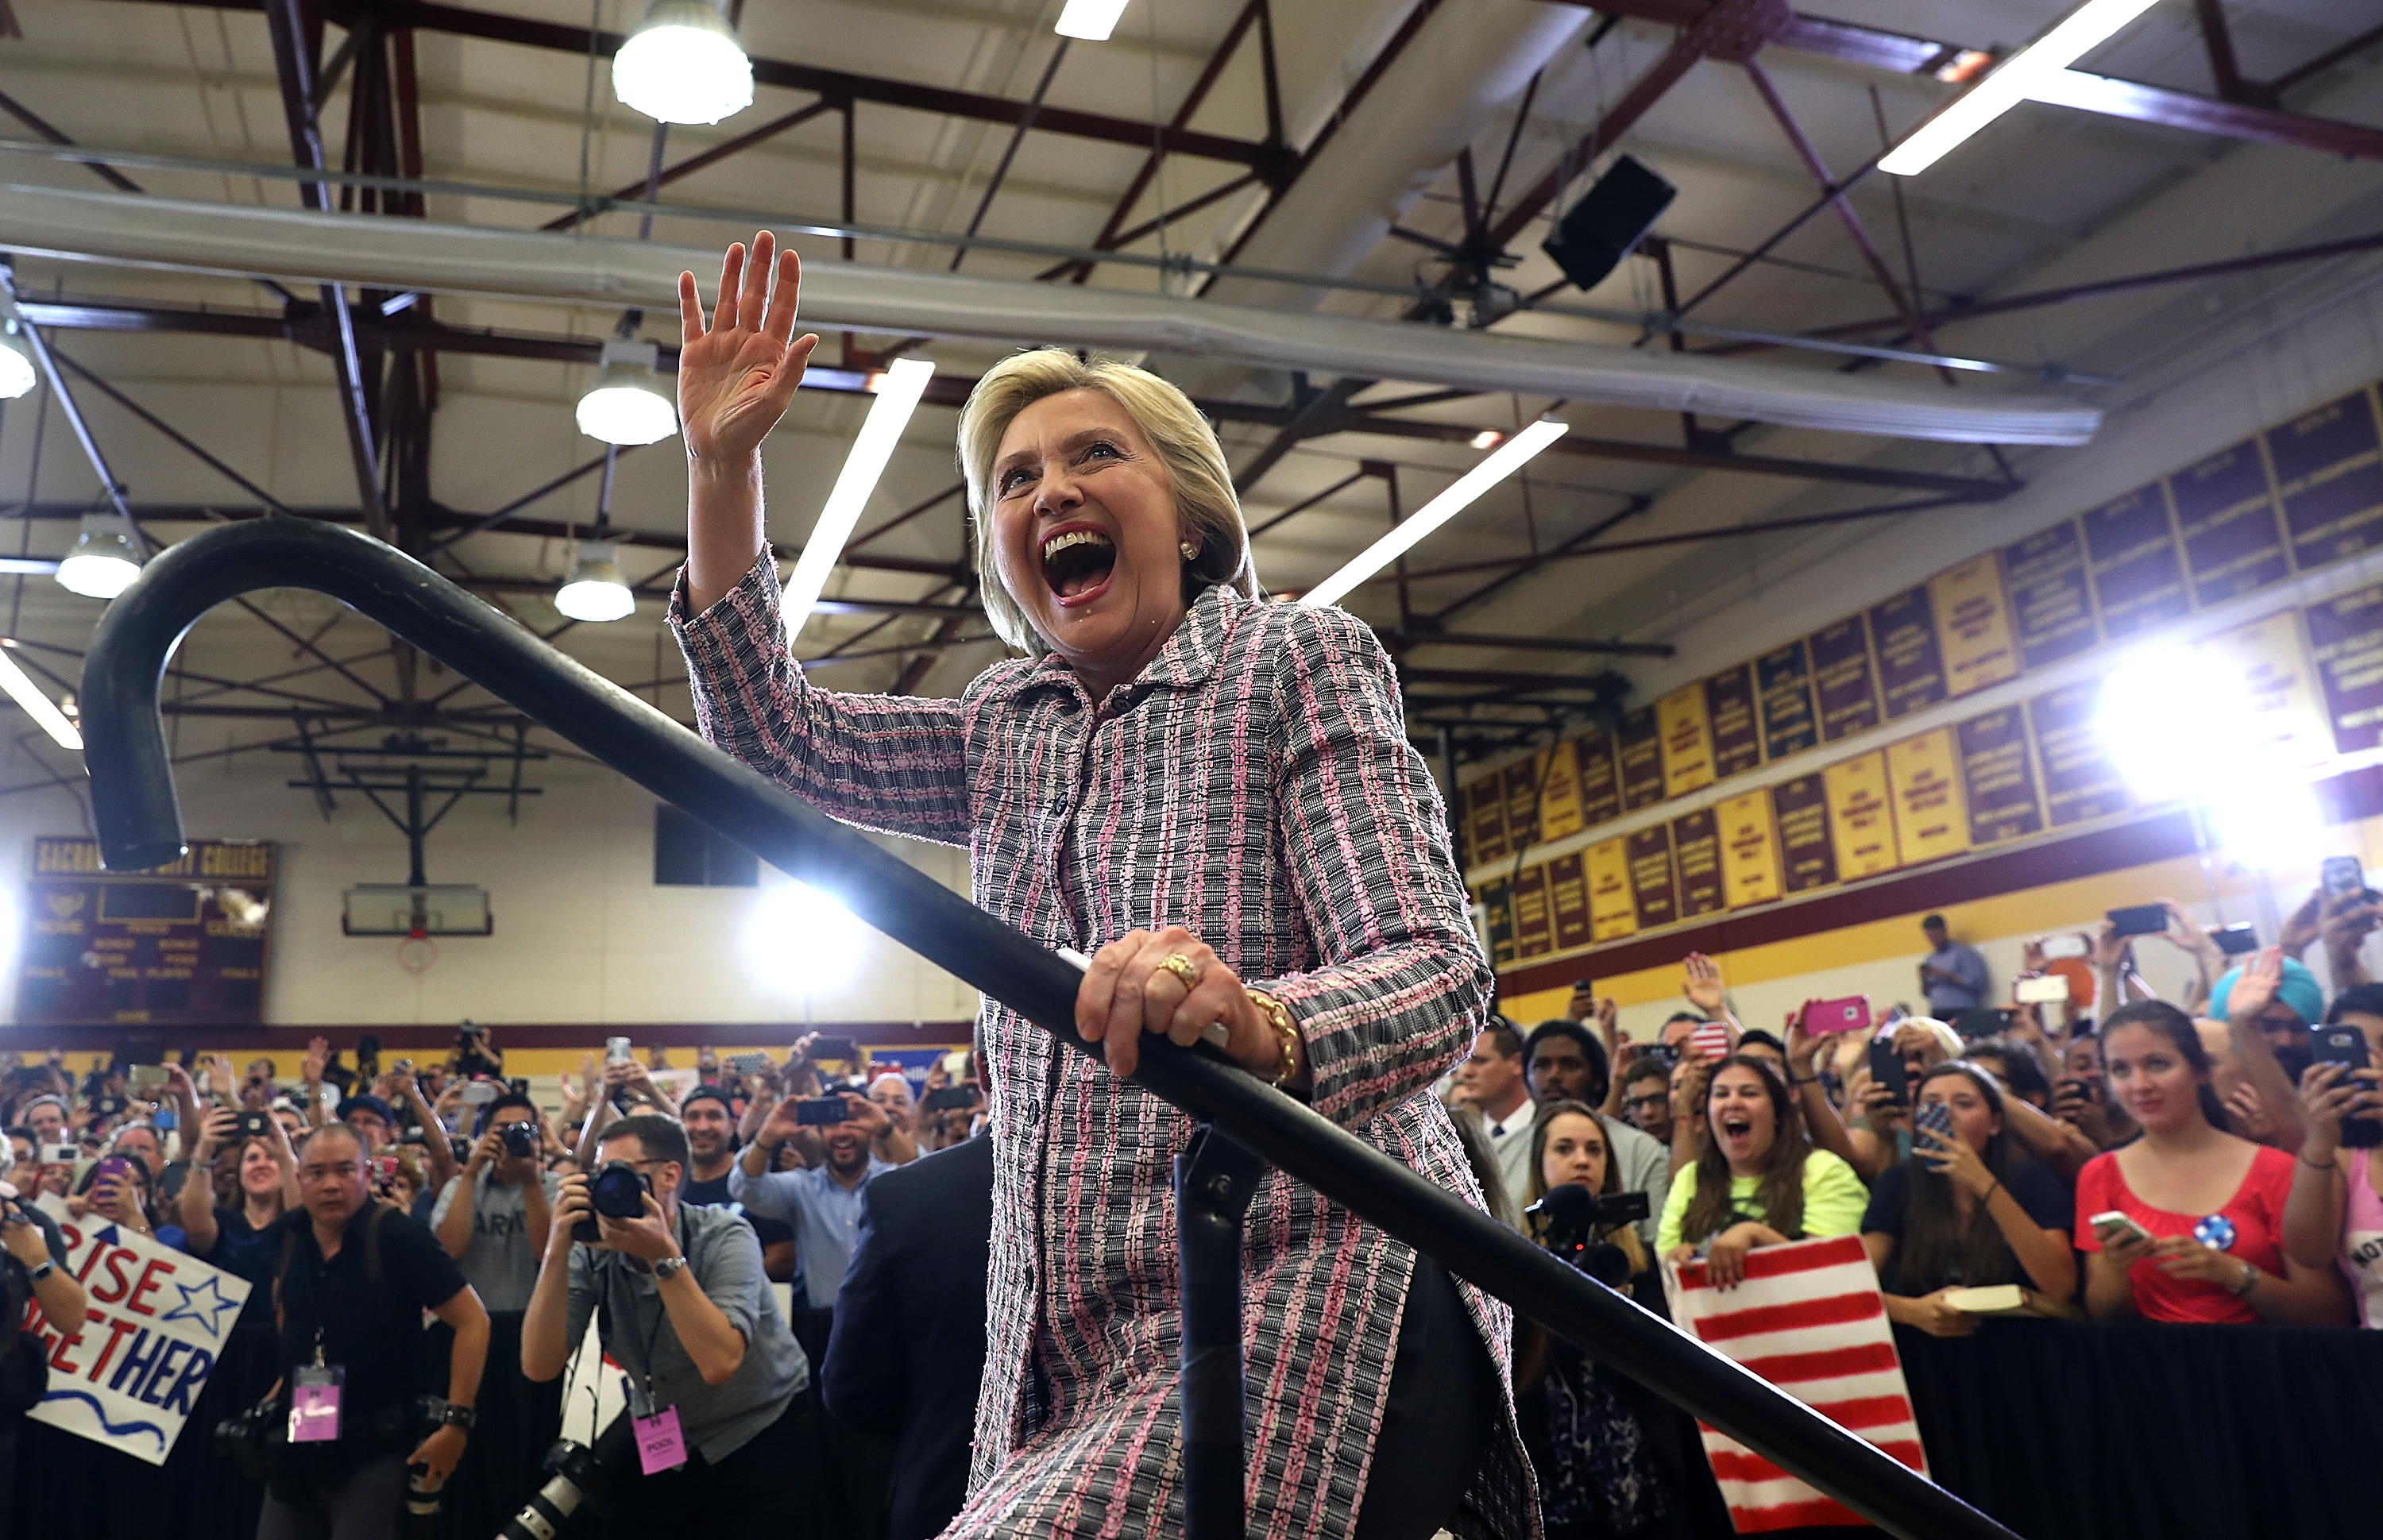 Democratic presidential candidate, former Secretary of State Hillary Clinton, greets supporters during a campaign rally at Sacramento City College on June 5, 2016 in Sacramento, California. The California primary is June 7. (Justin Sullivan—Getty Images)